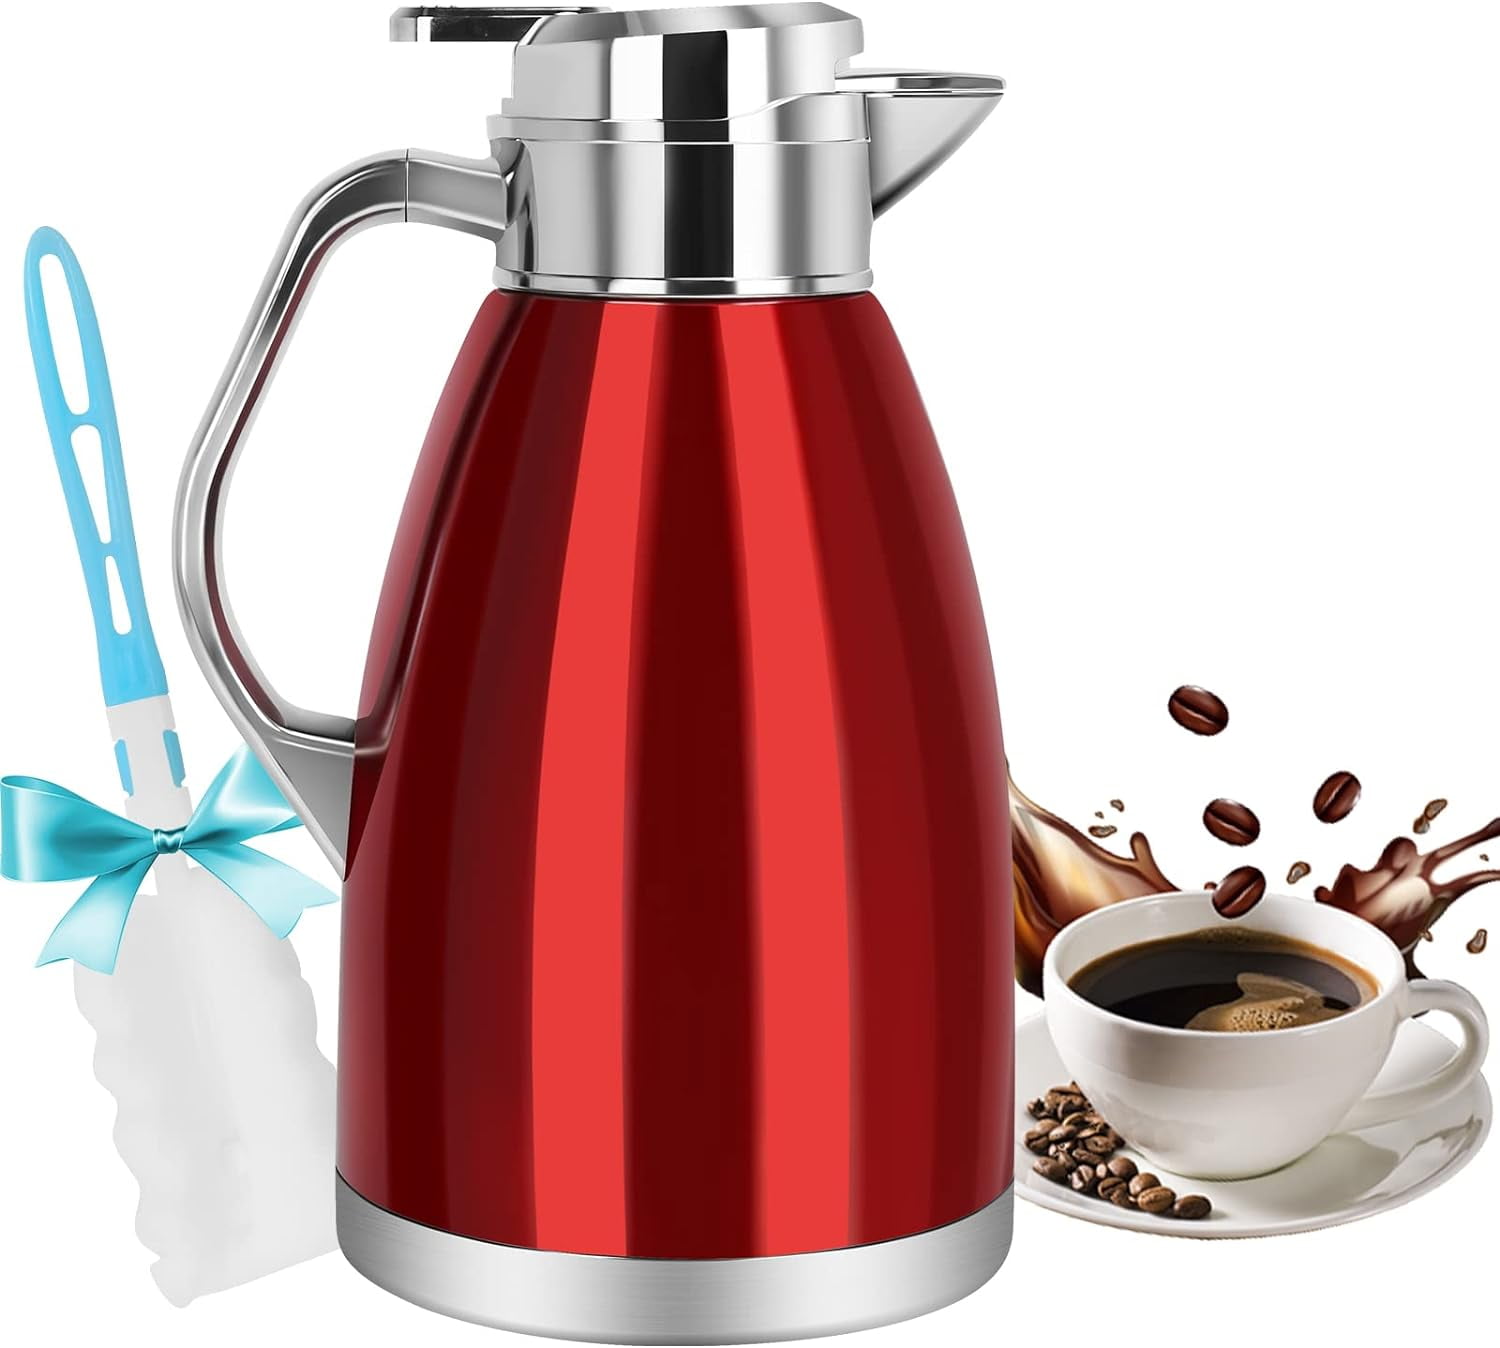 SSAWcasa 61oz Thermal Coffee Carafe Stainless Steel Insulated